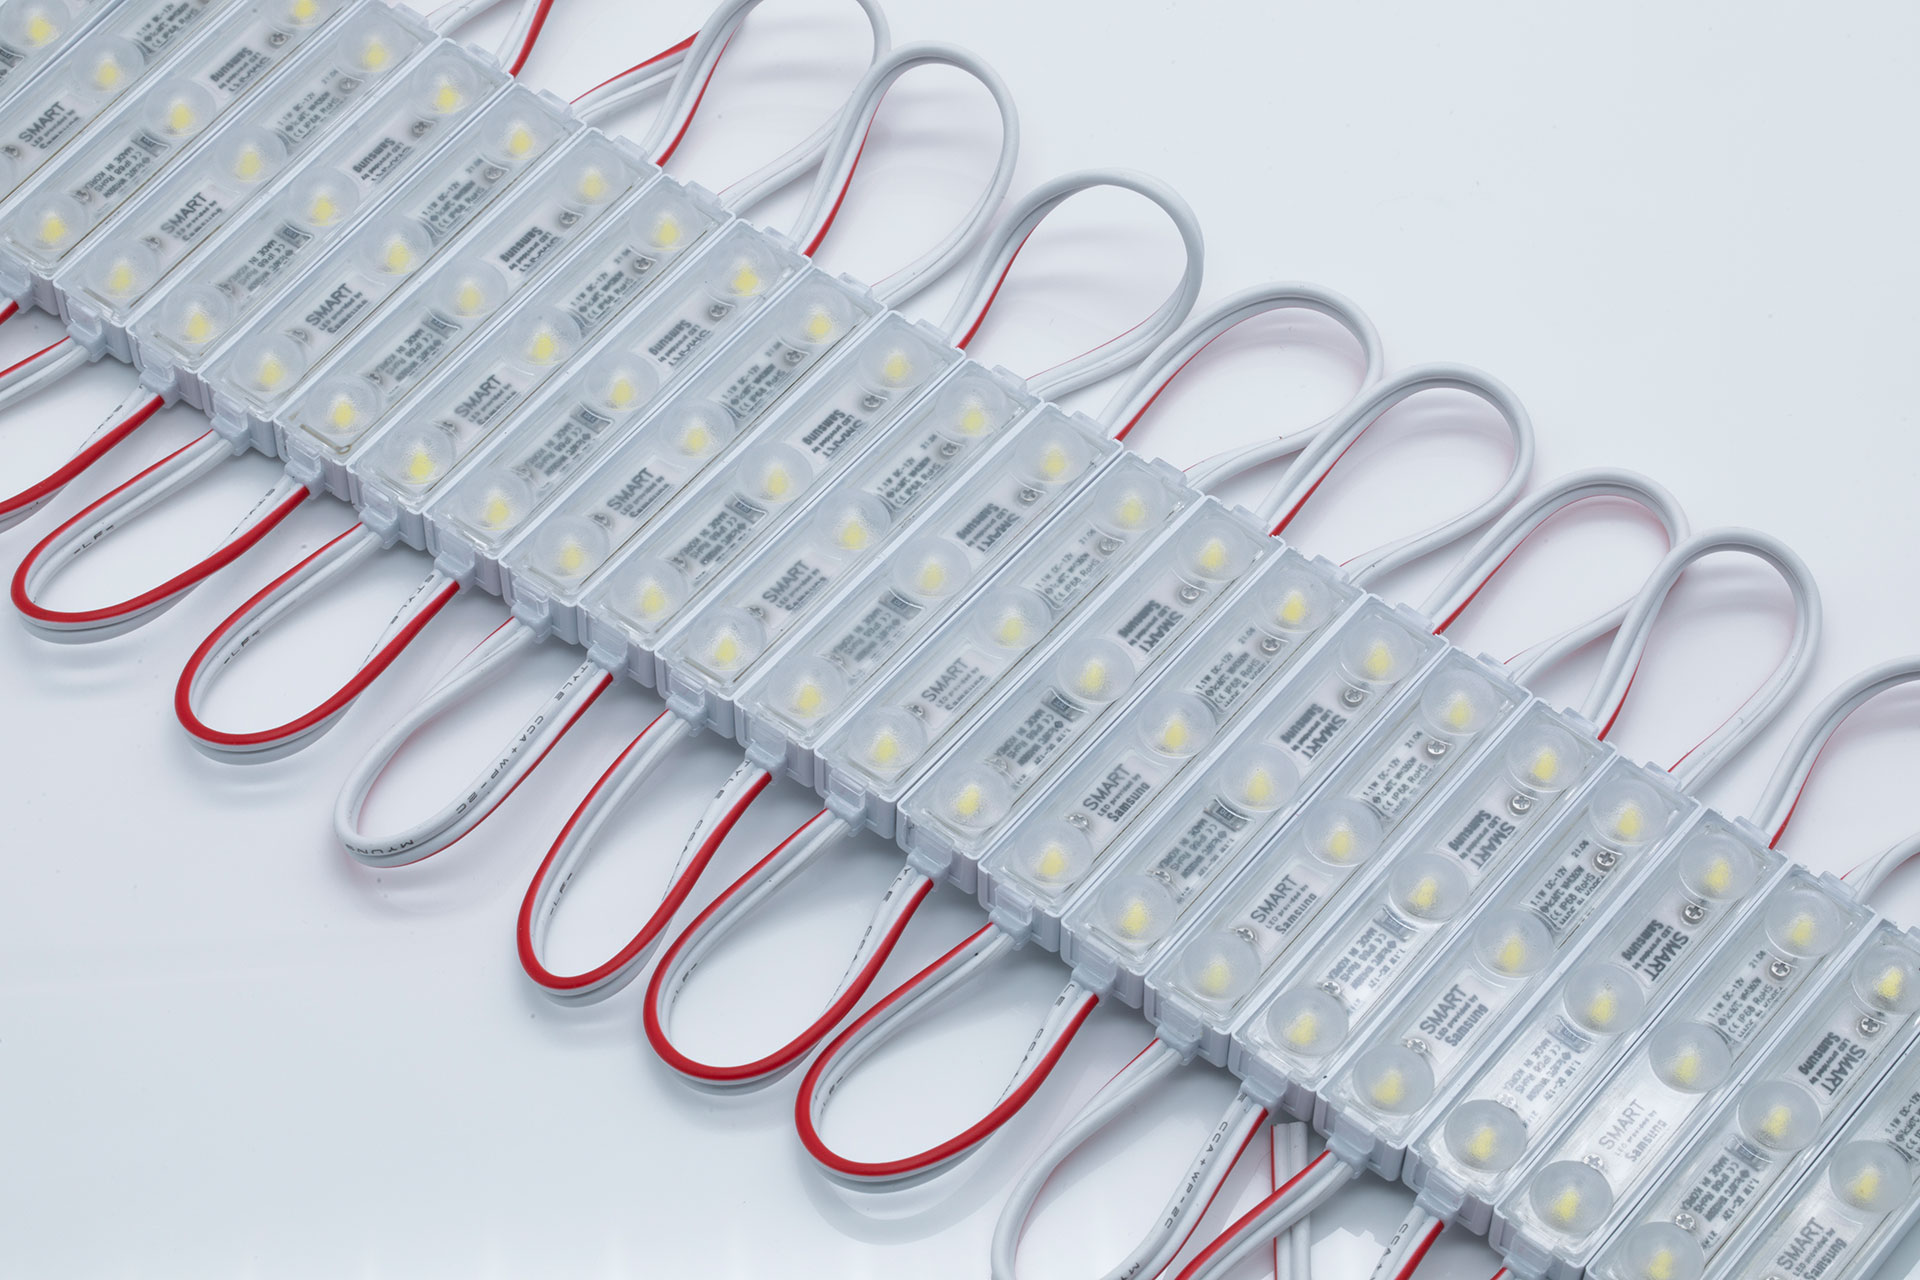 LED Module Leading Supplier for LED Strip, Modules & Drivers in UAE | Sabin Plastic